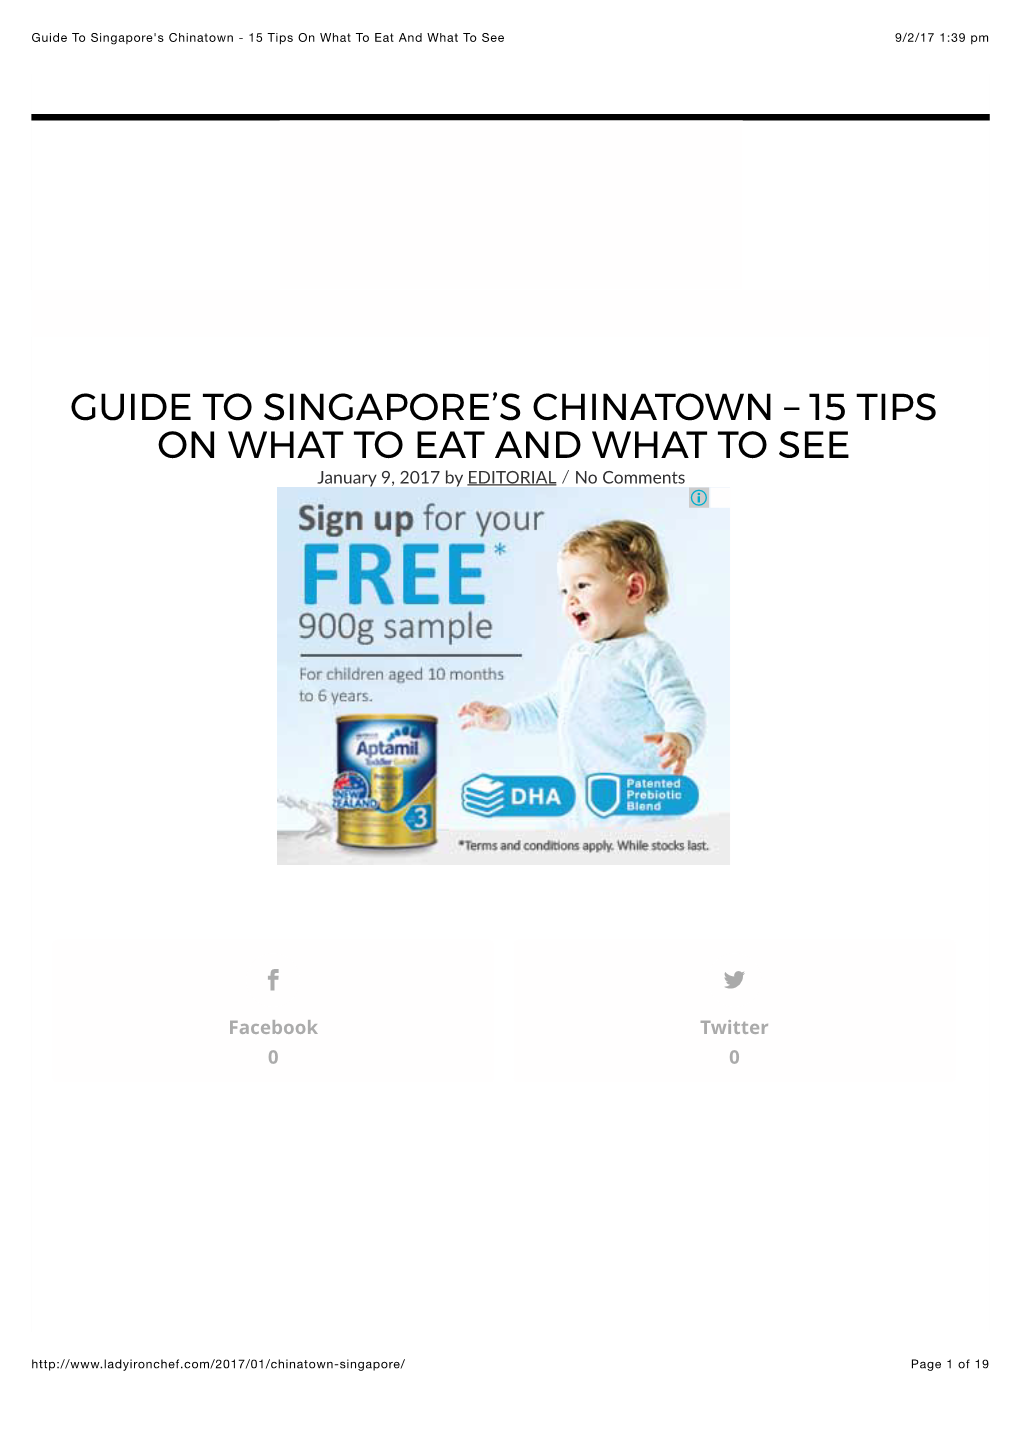 Guide to Singapore's Chinatown - 15 Tips on What to Eat and What to See 9/2/17 1:39 Pm